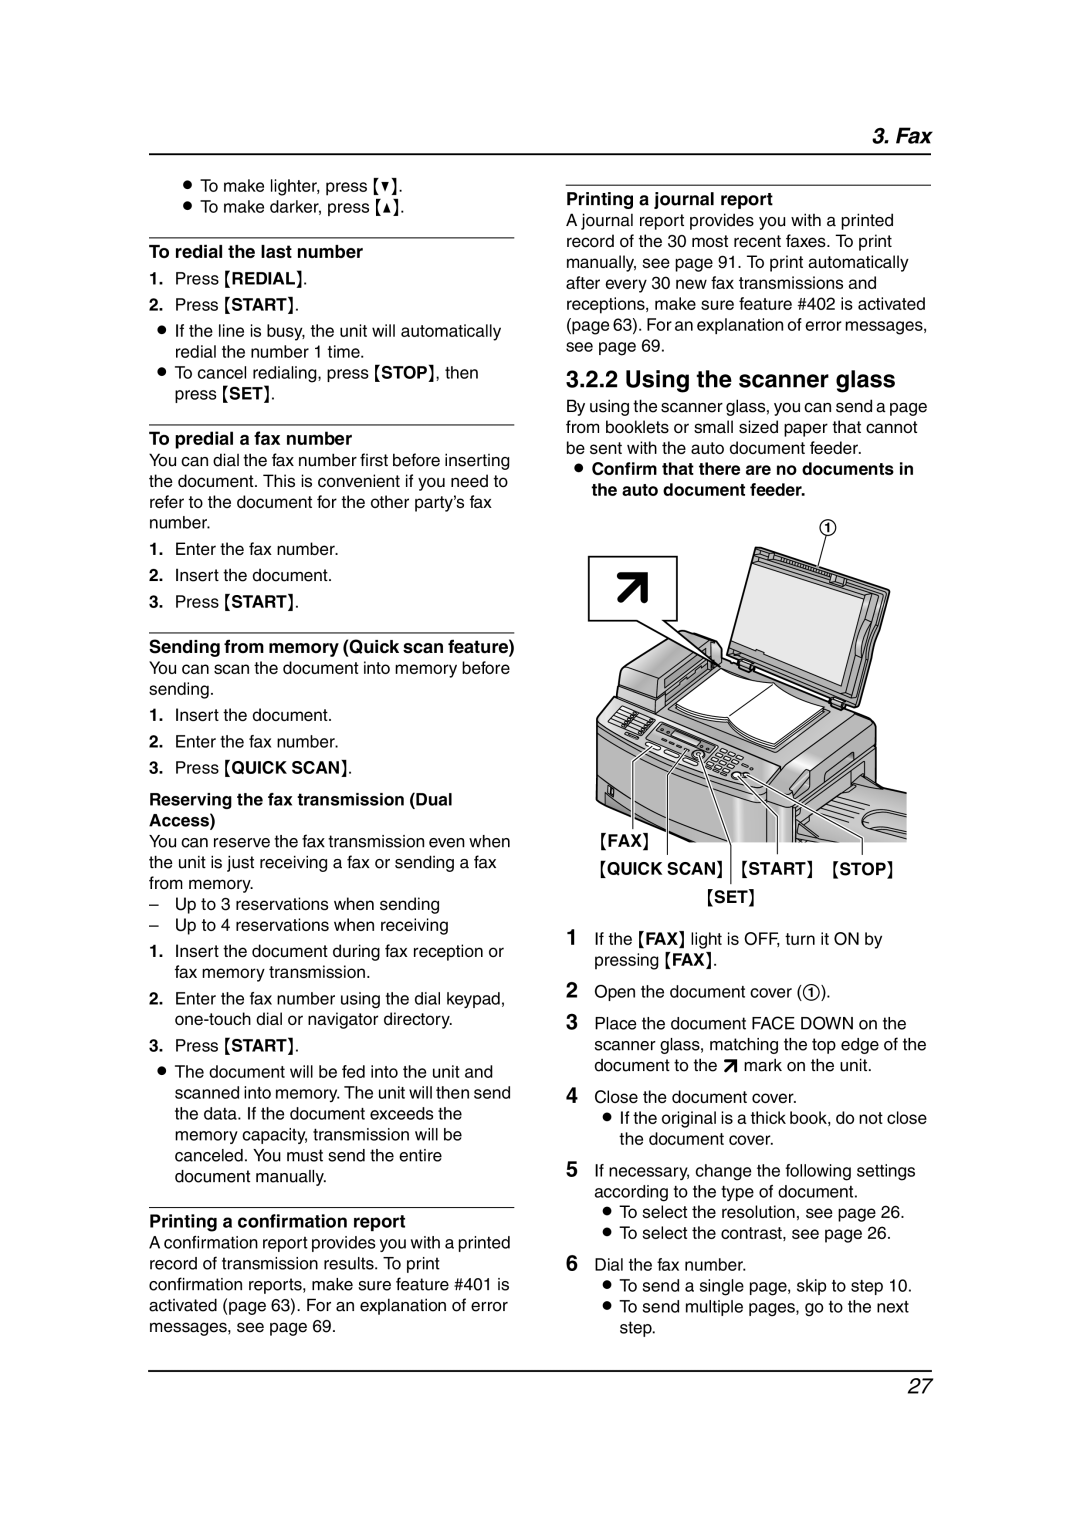 Panasonic KX-FLB851 Using the scanner glass, To redial the last number, To predial a fax number, Printing a journal report 